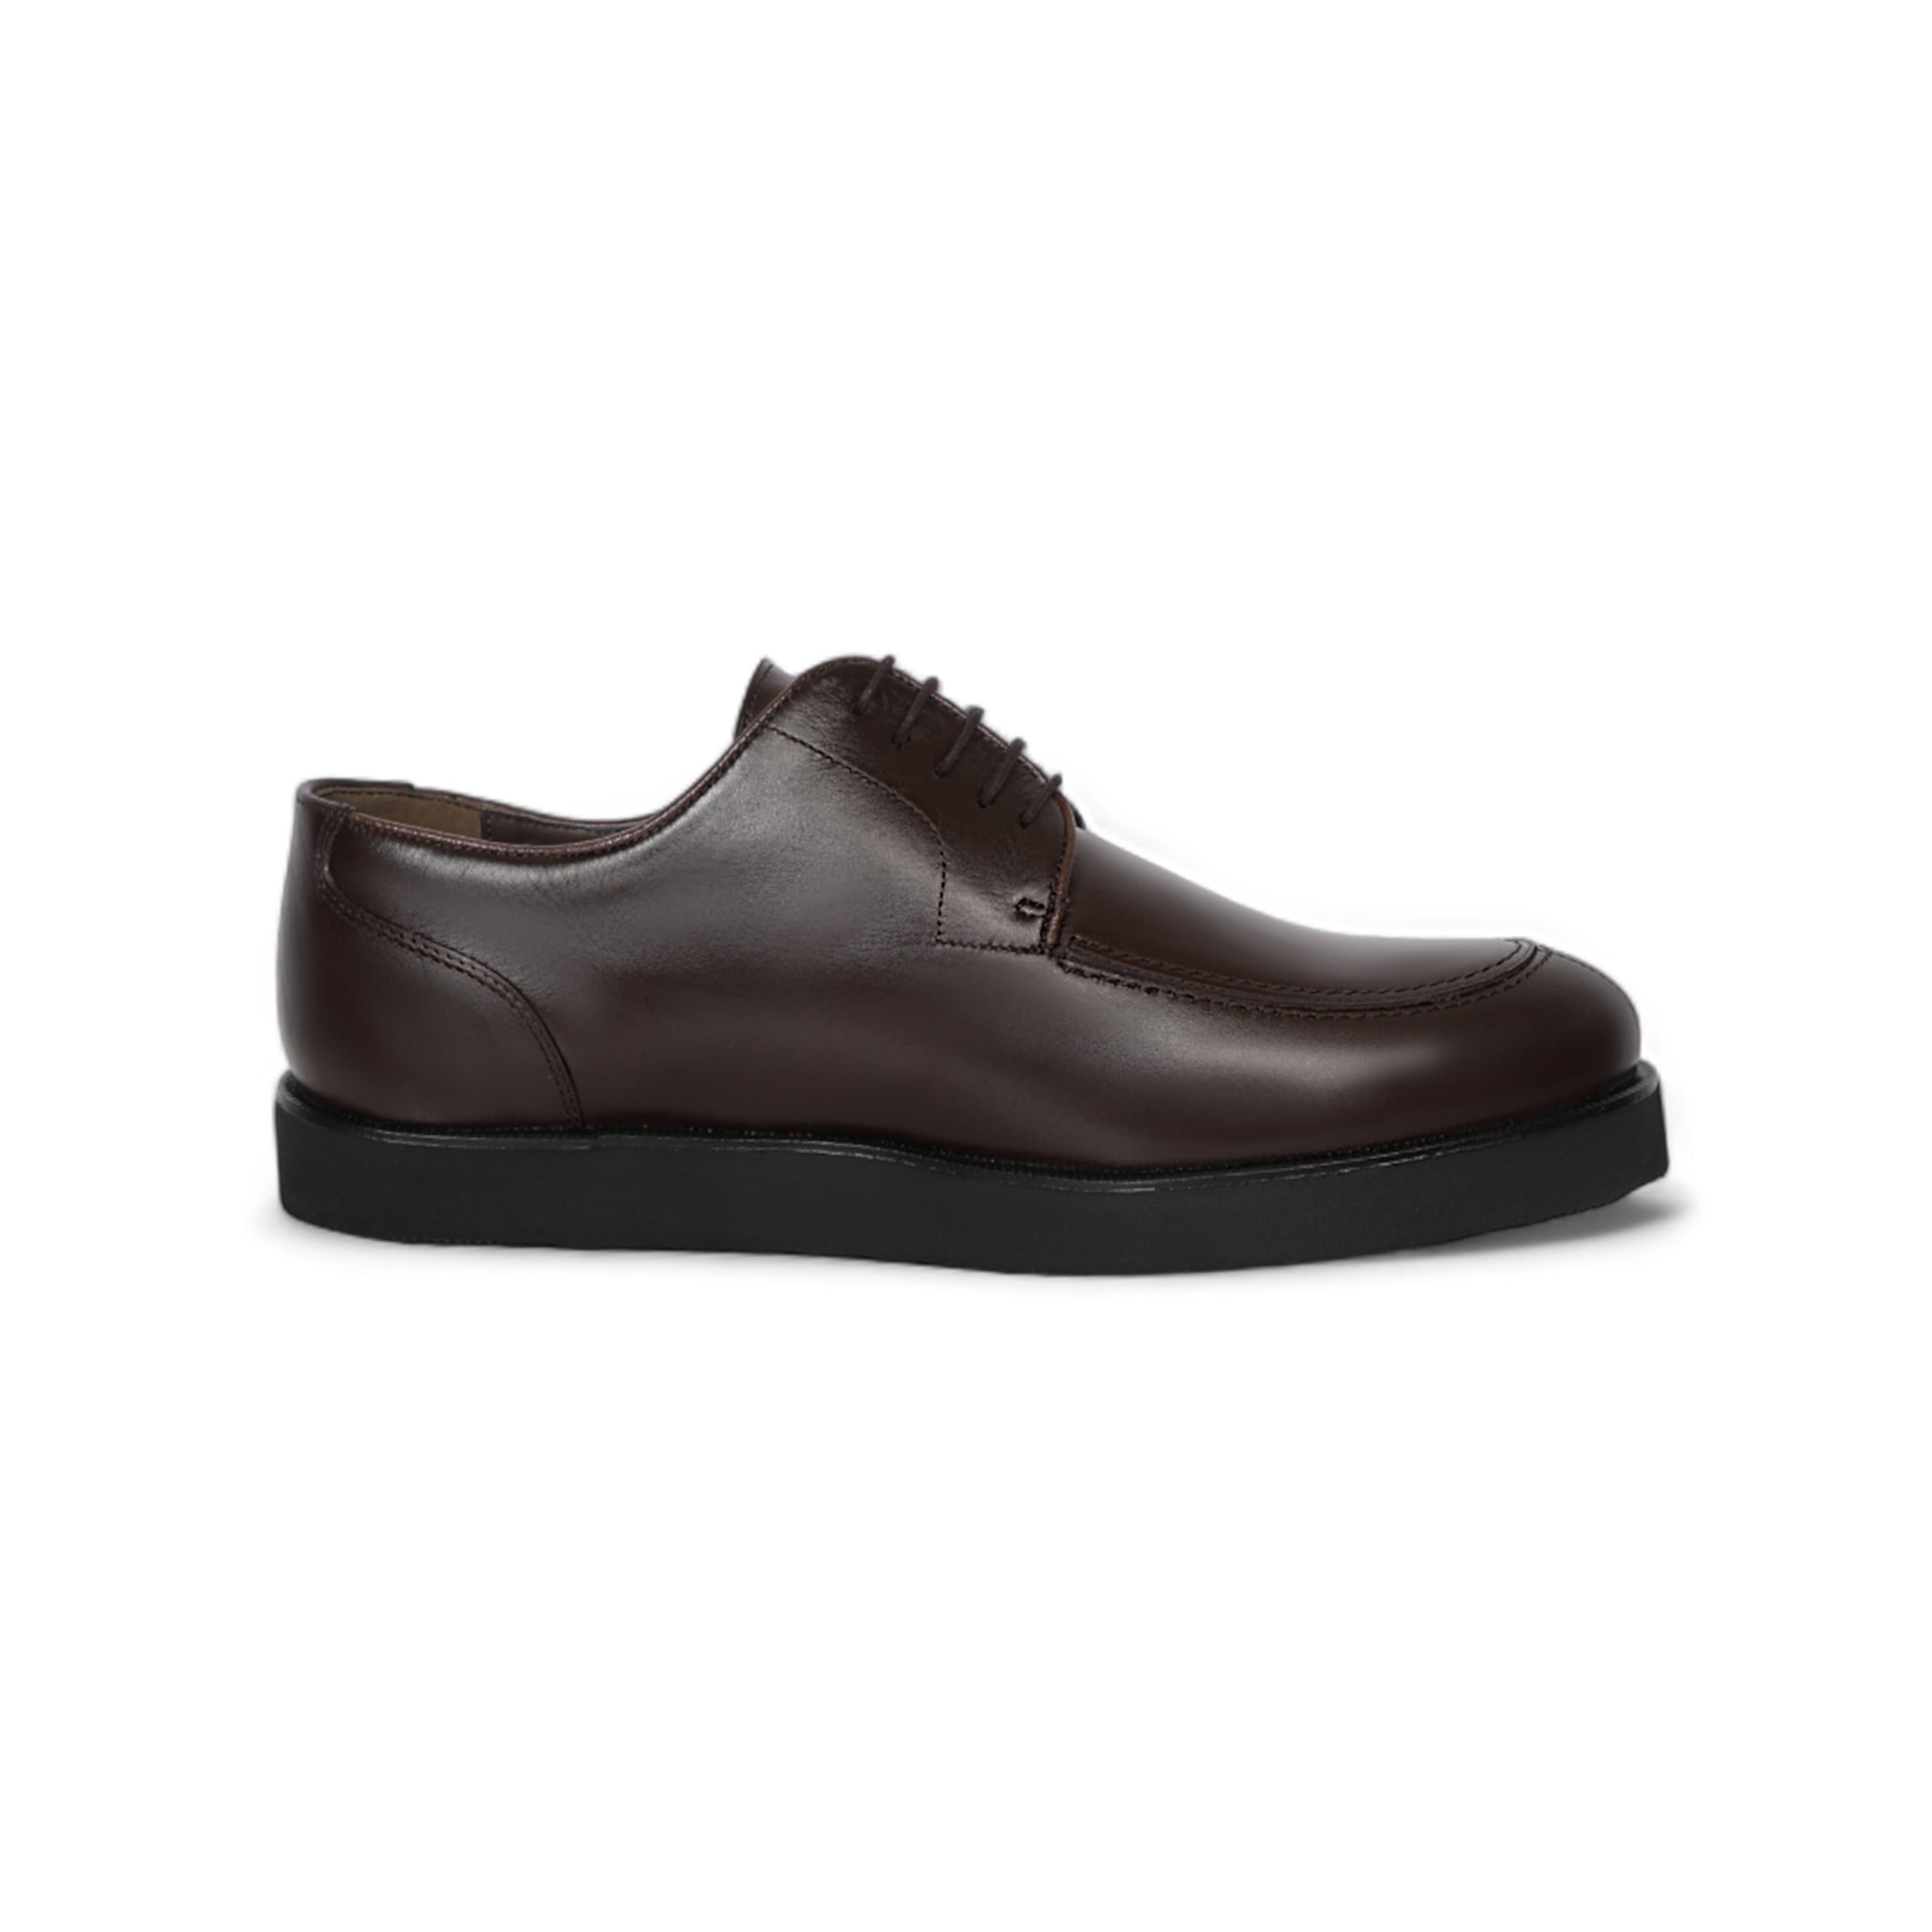 Classic Men Dark Brown Shoes With Flat Insole